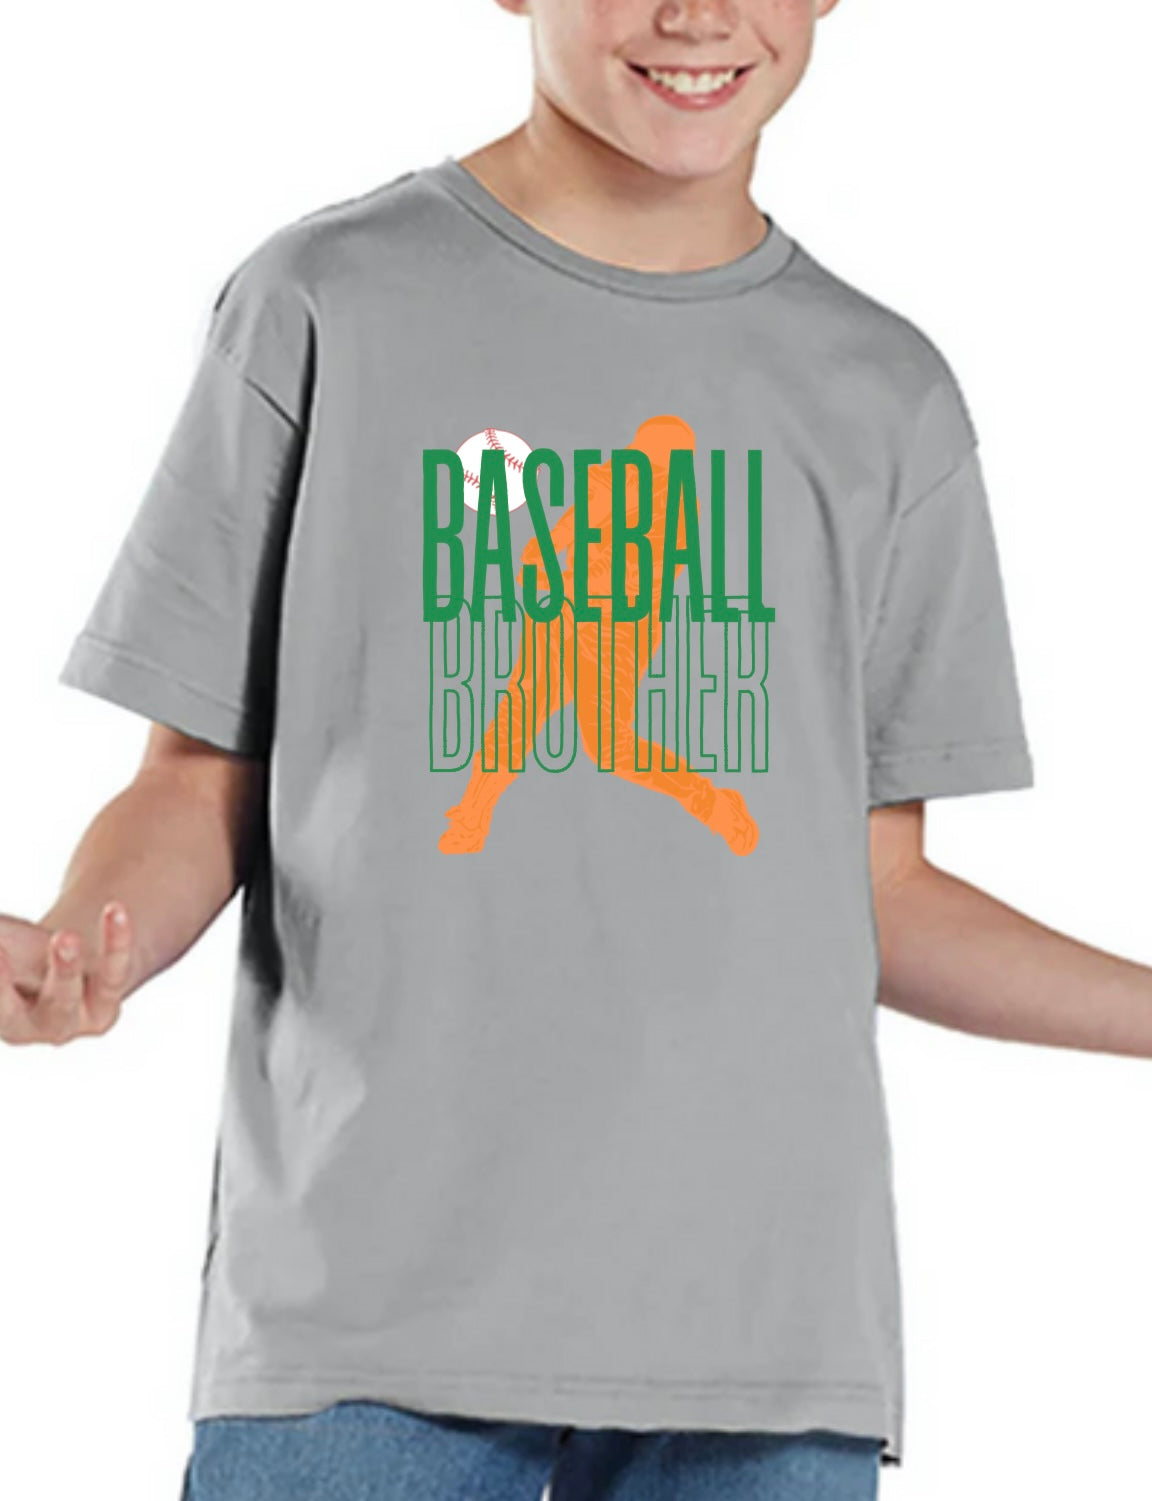 Dry Fit Youth Baseball Brother Tee